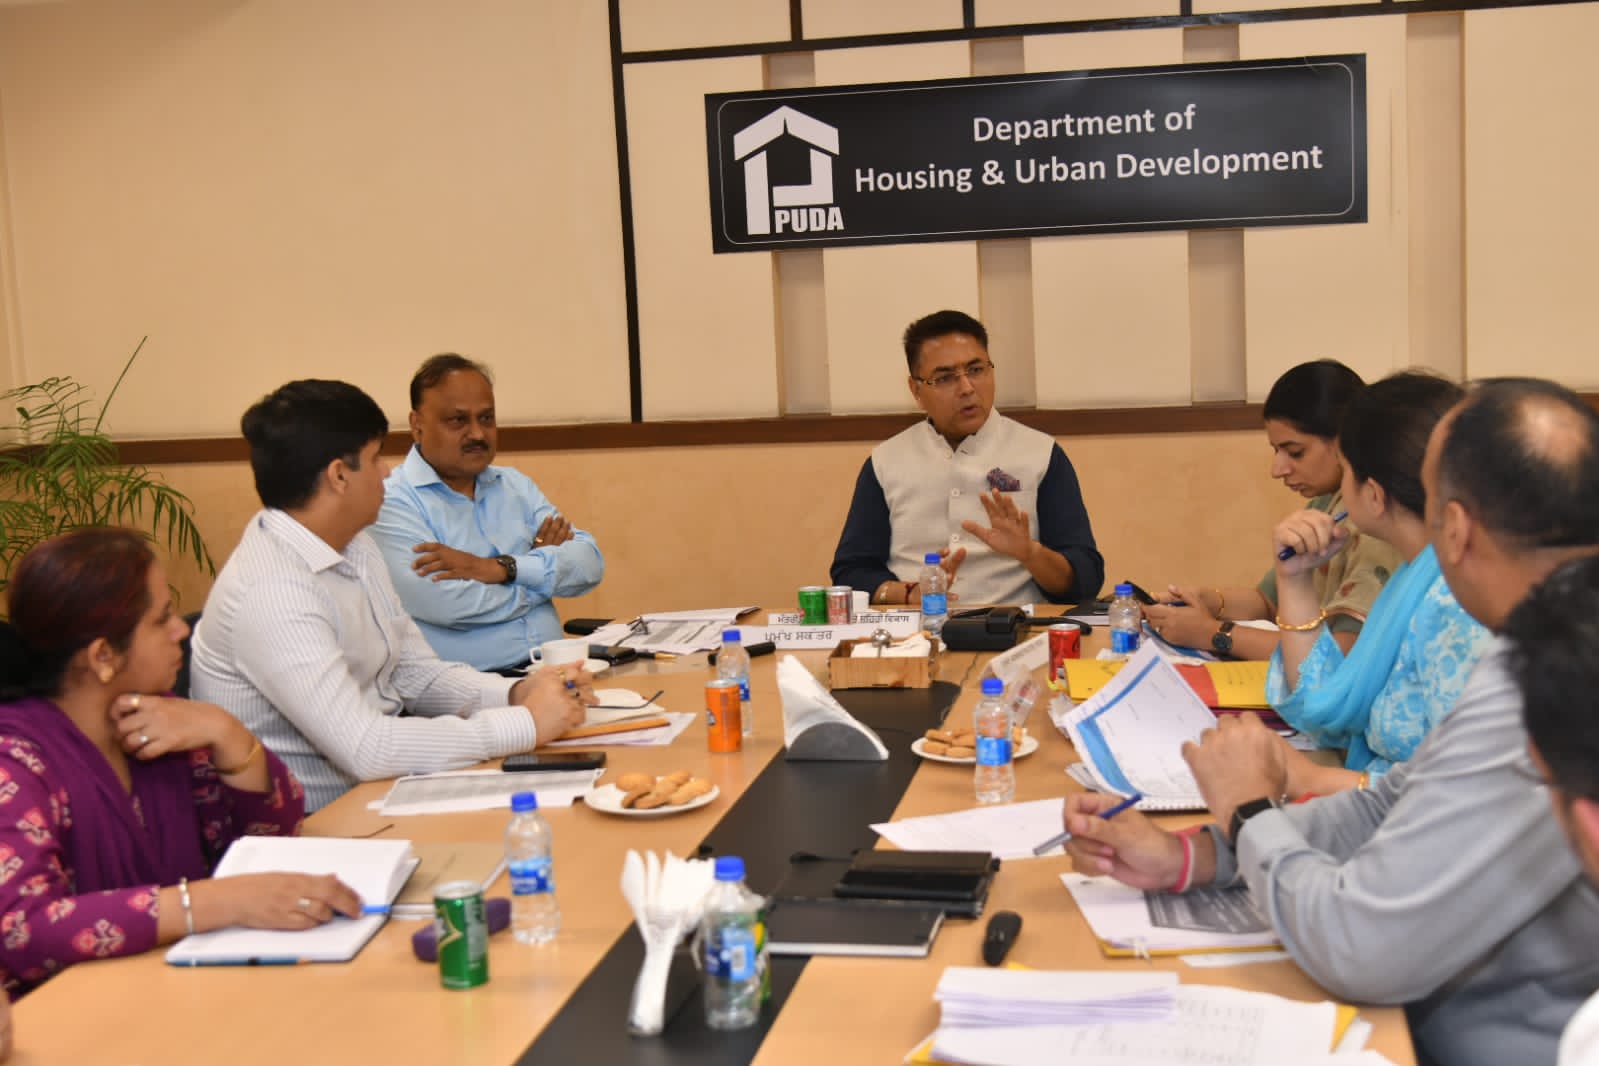 Residential & commercial urban estate to come up in Ludhiana: Aman Arora